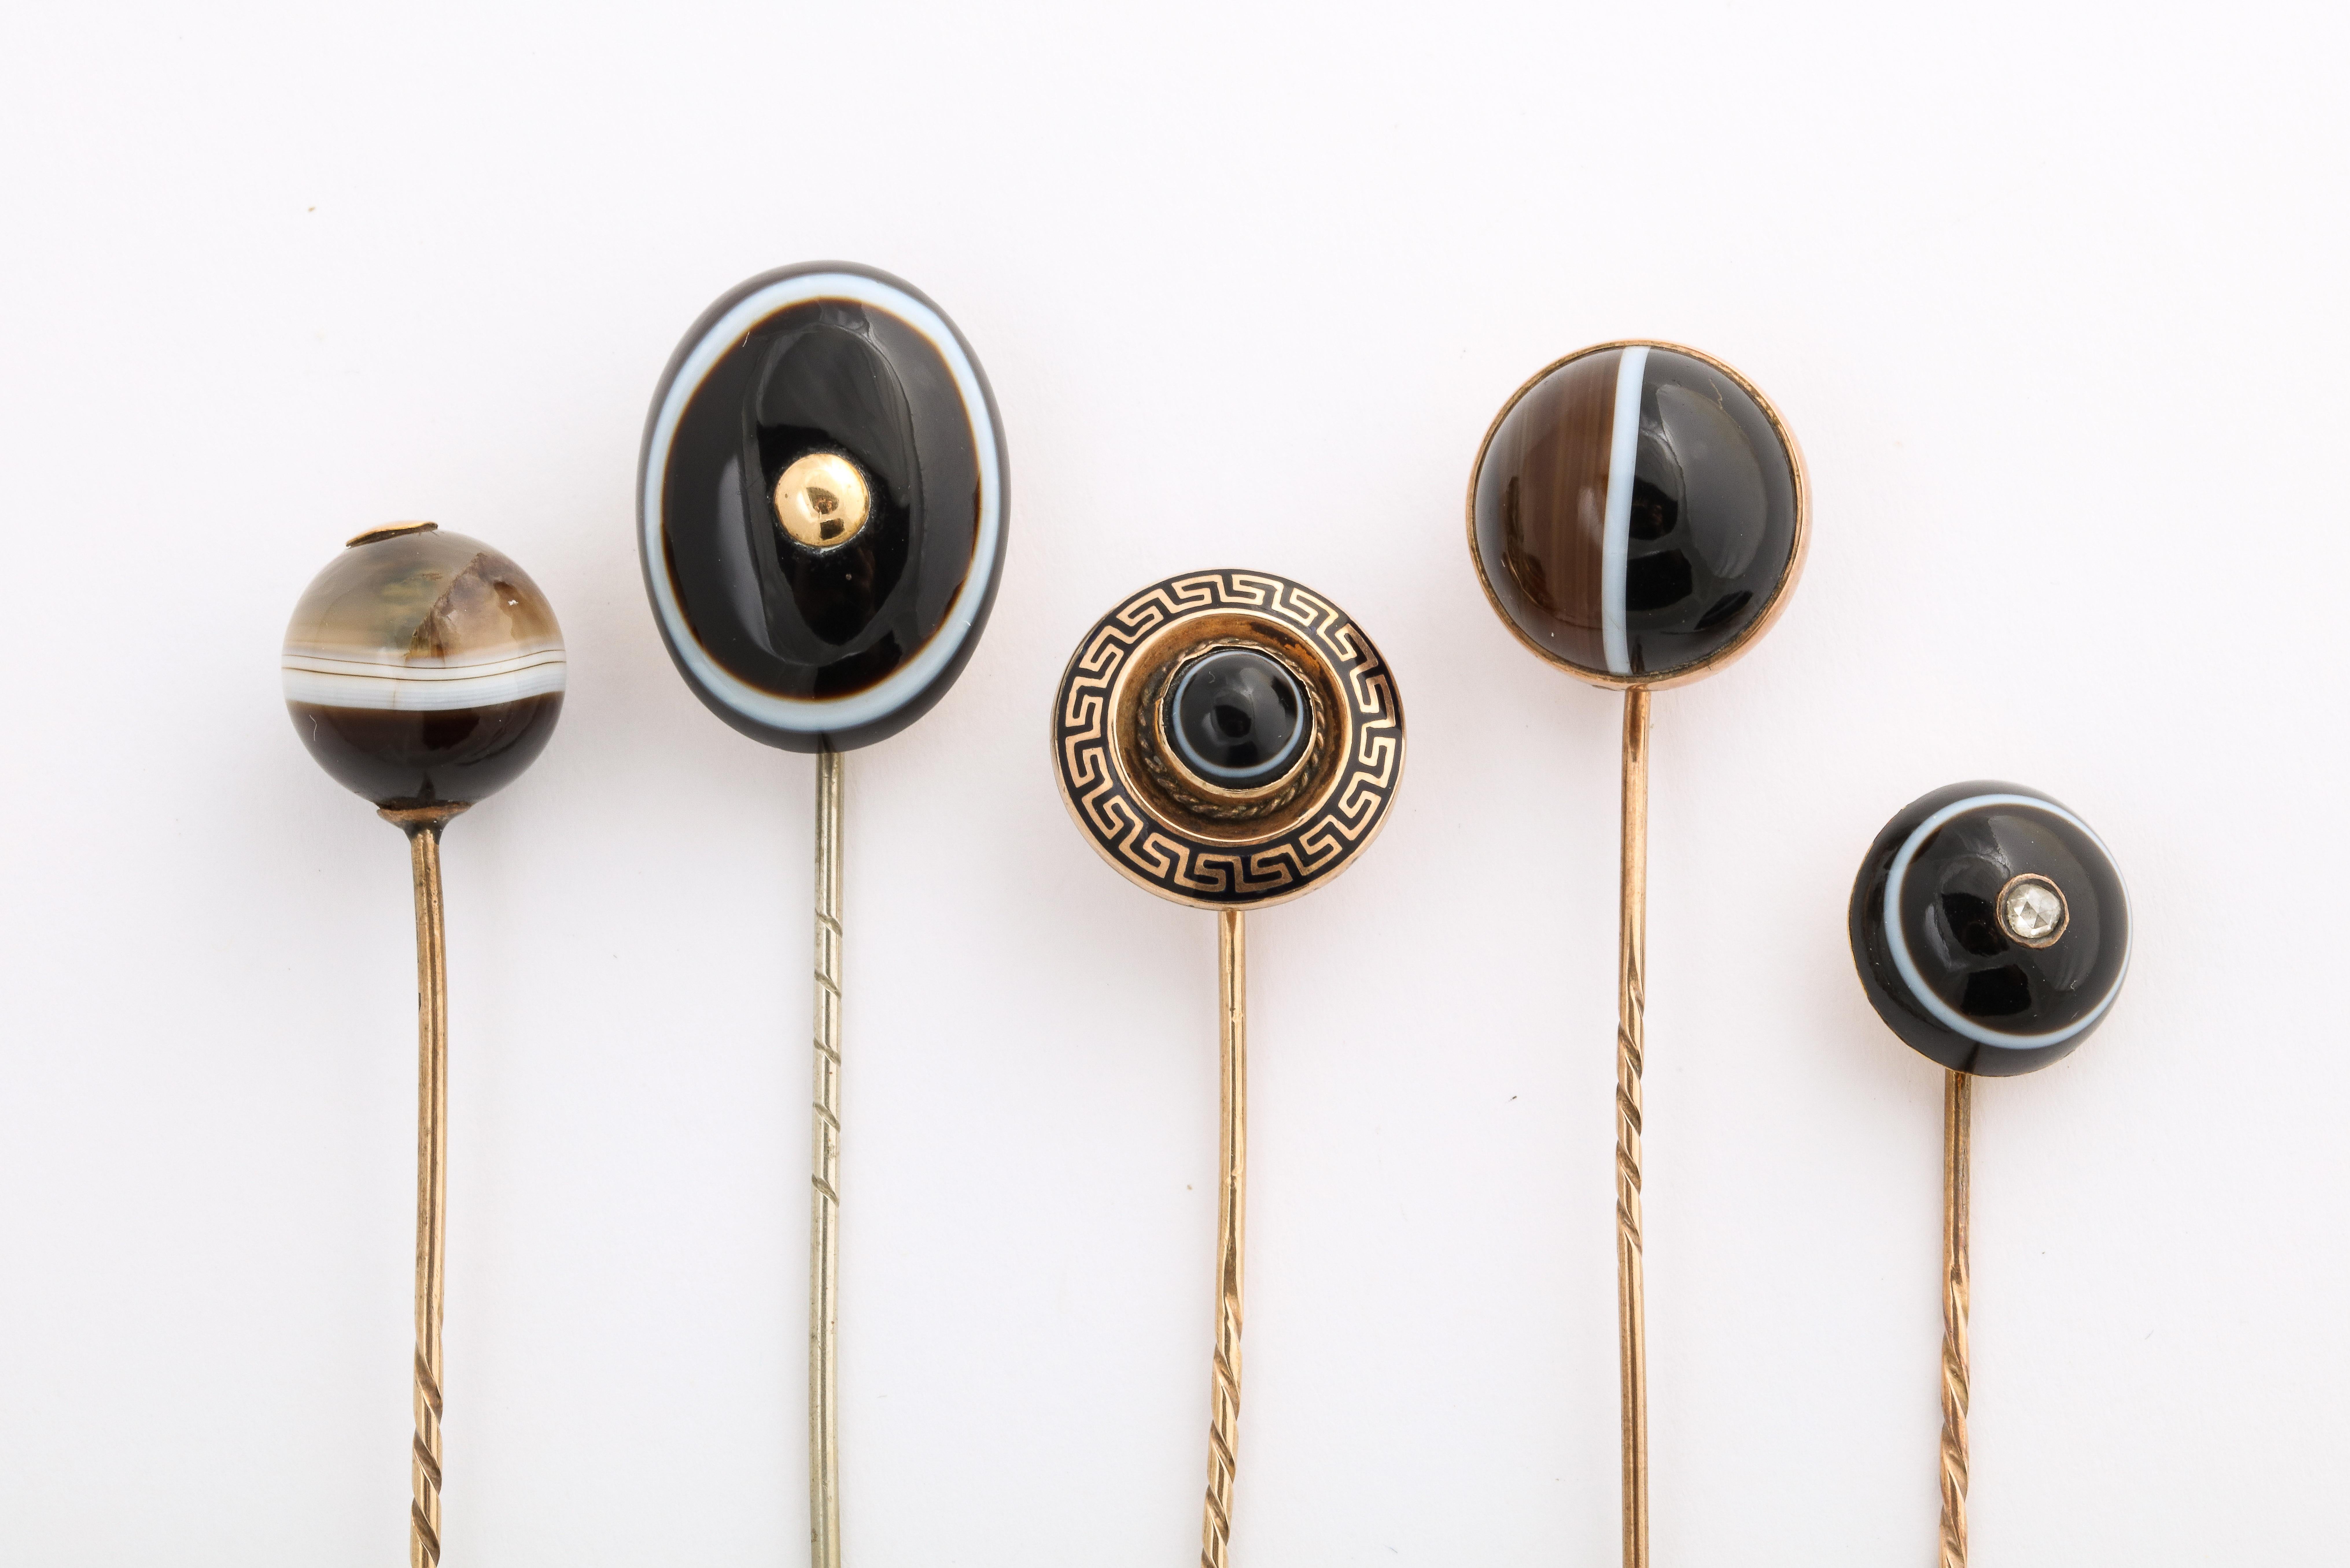 A Victorian gold stickpin collection, all in banded agate, is for sale as a group or as an individual item. Banded Agate makes a handsome contrast with clothing in any texture or color. All were made c. 1860 in England and all are in perfect